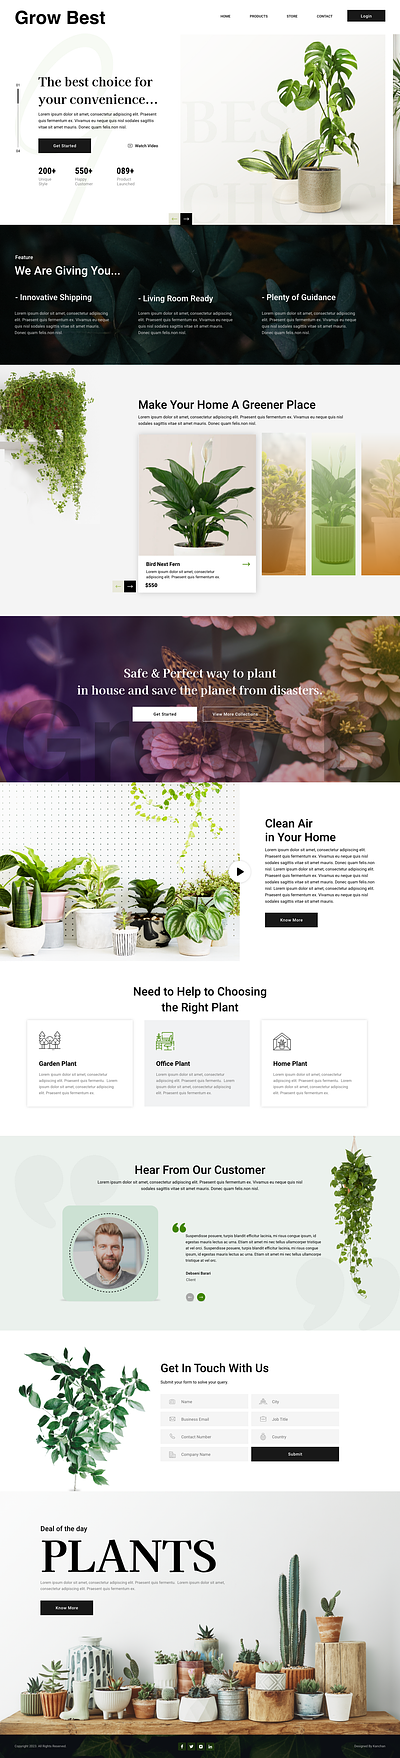 Grow Best online plant delivery graphic graphic design growbest ui webpage